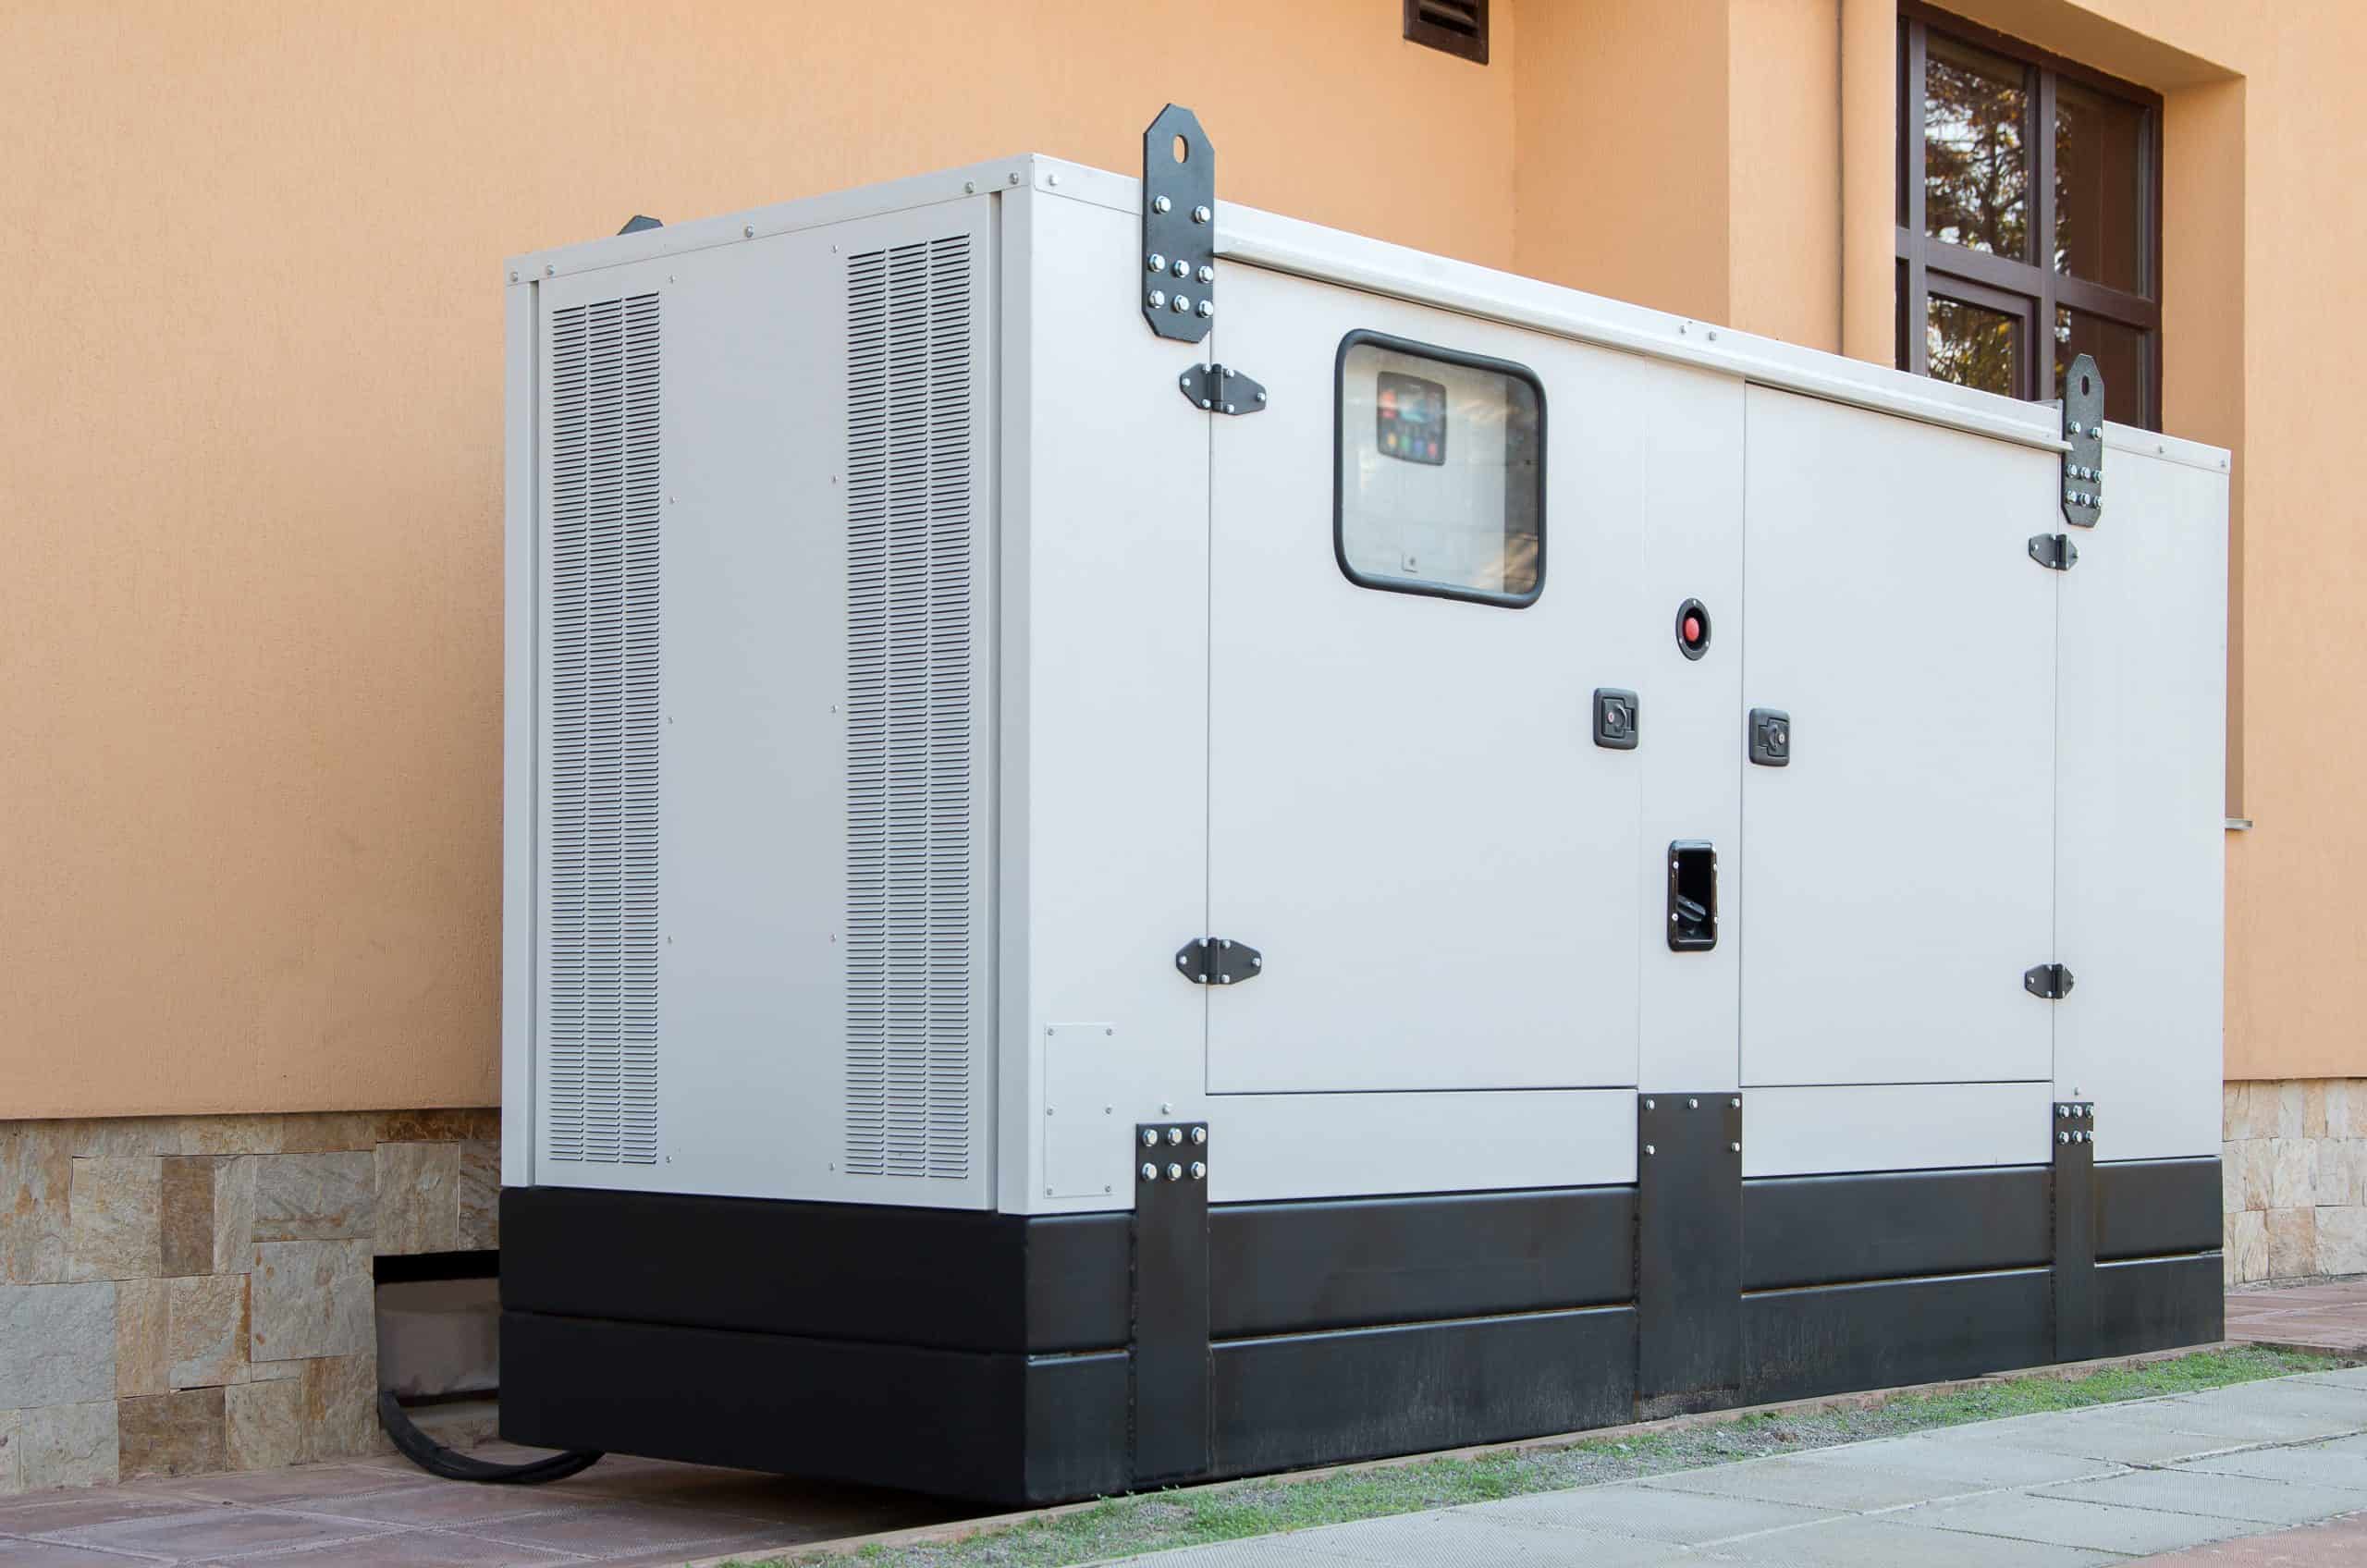 Charter Electric Large home generators